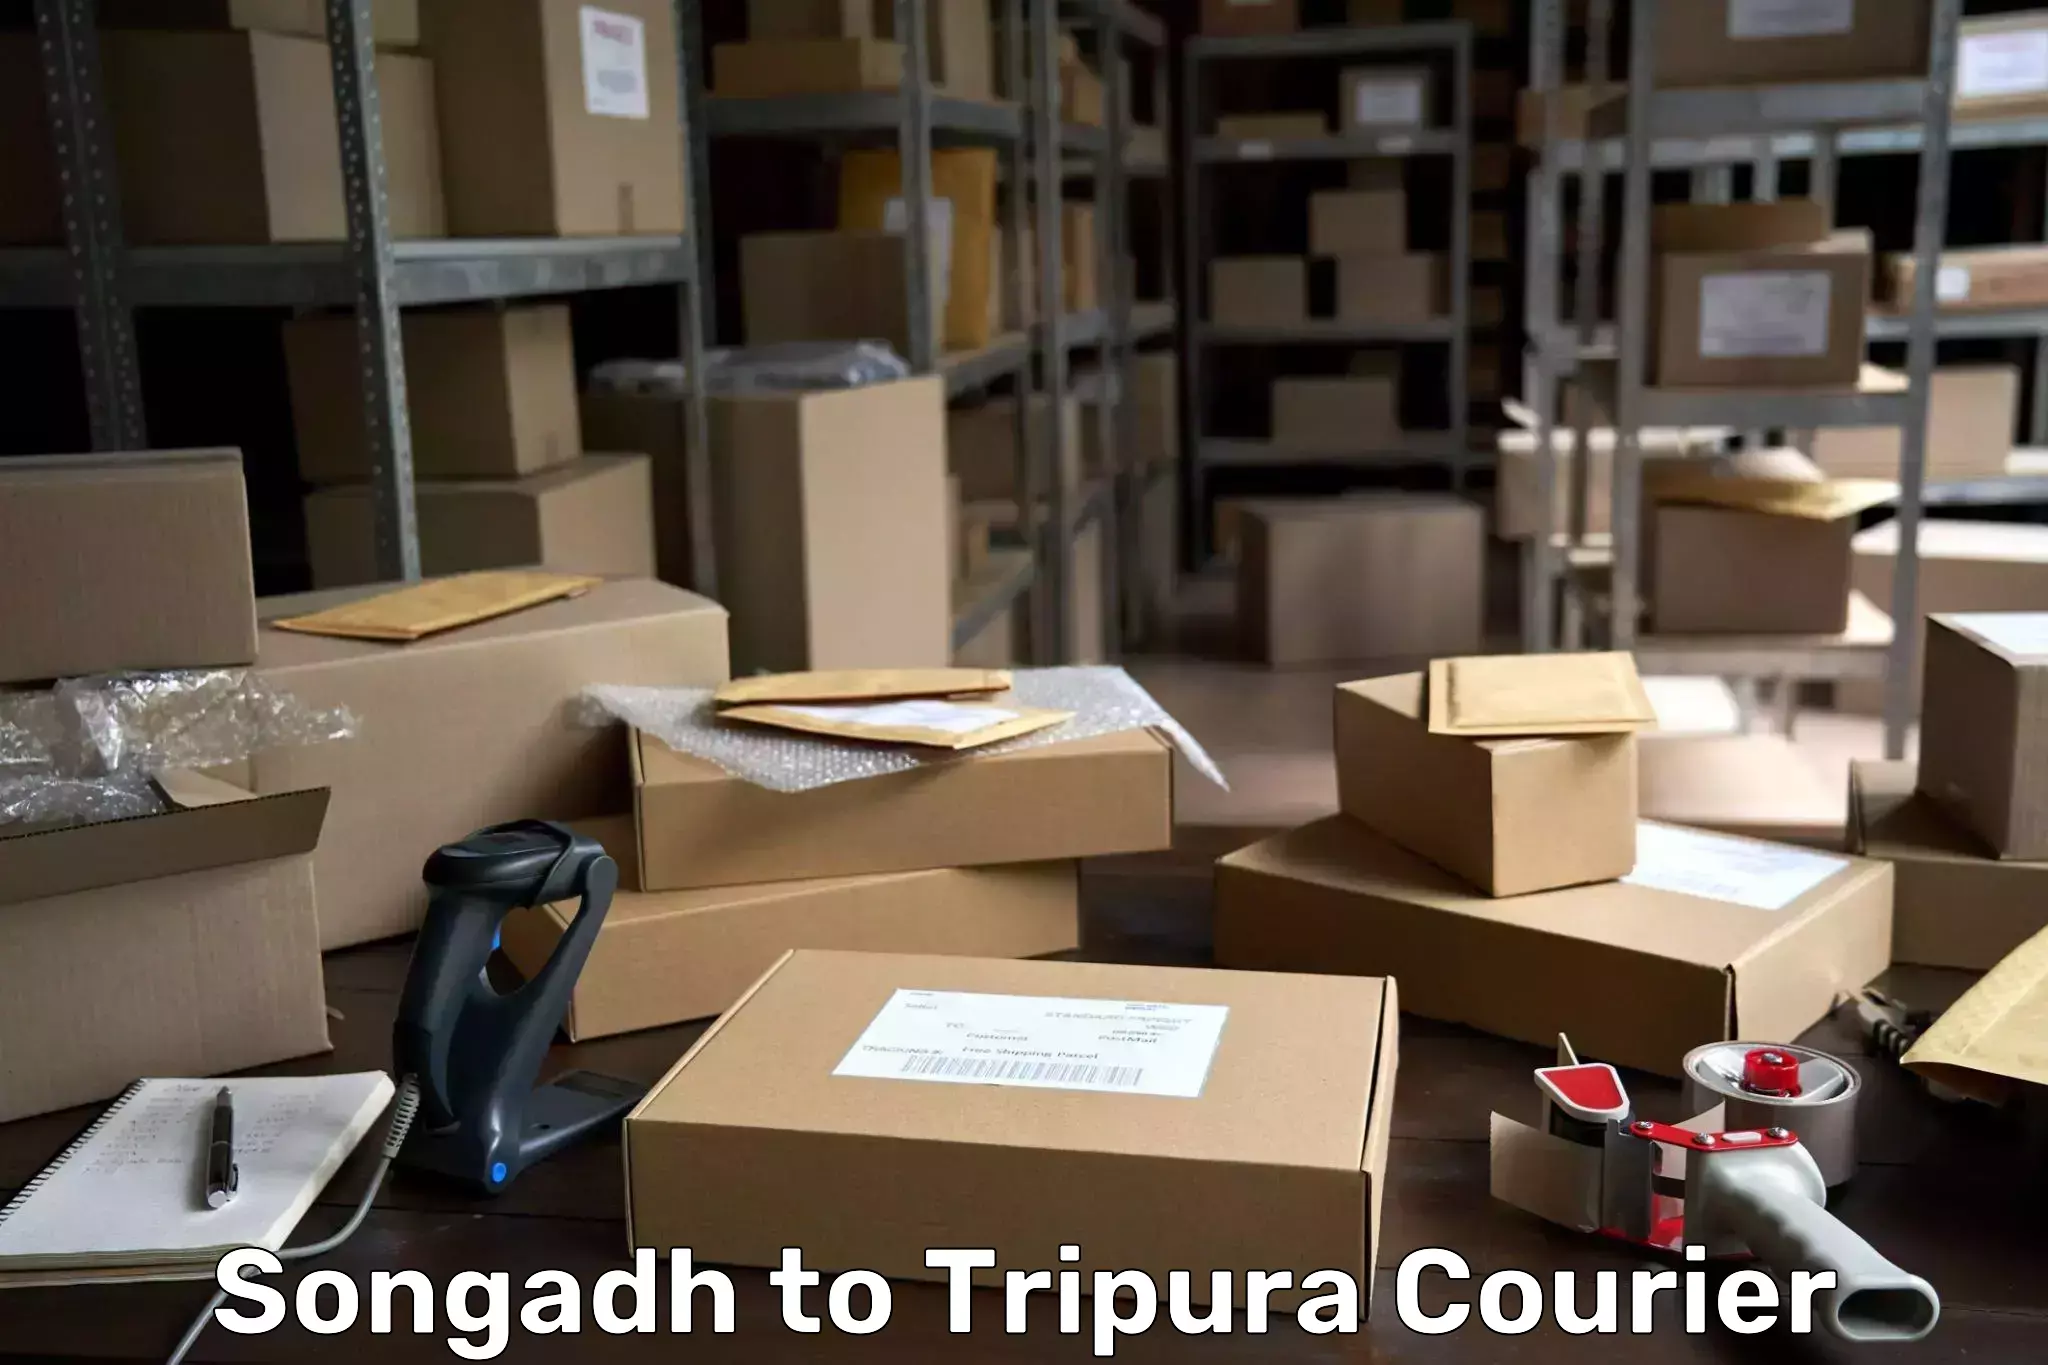 Lightweight parcel options in Songadh to Tripura